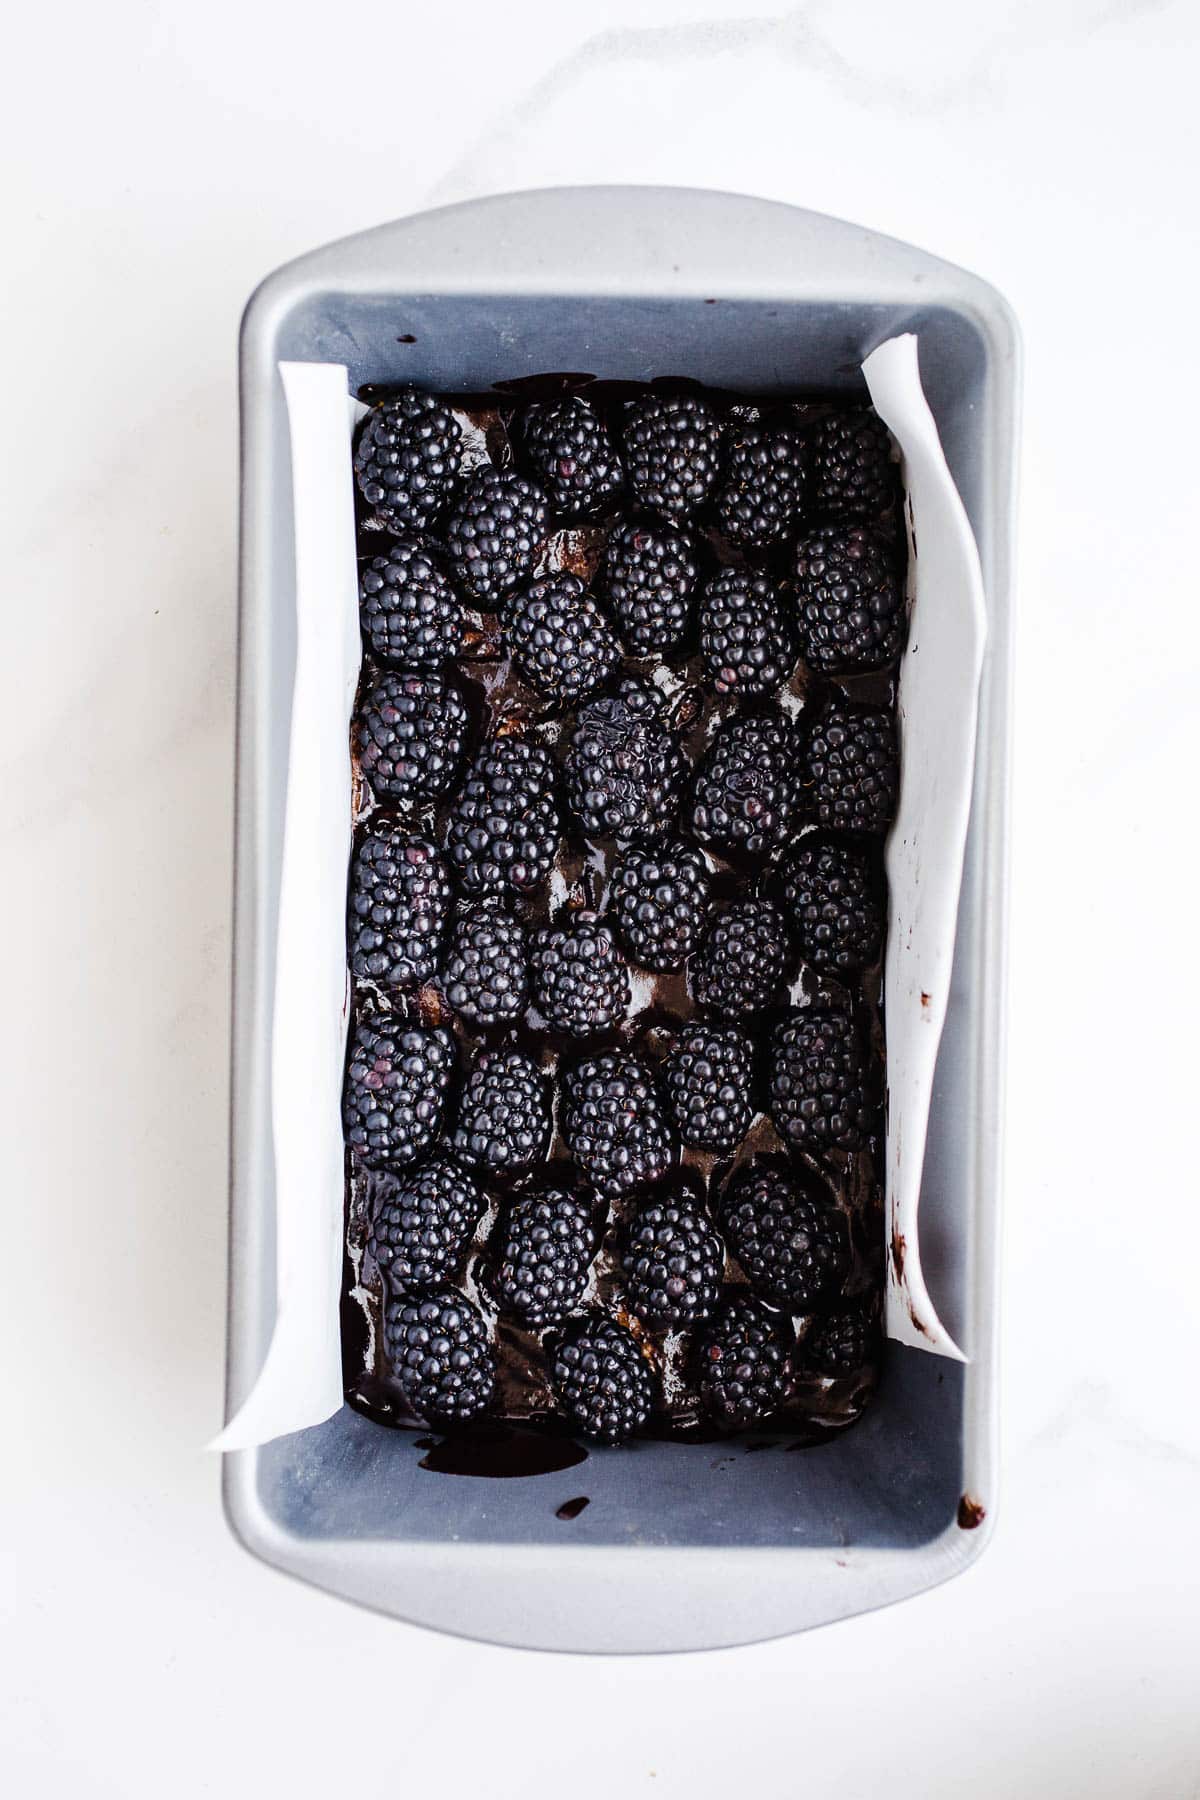 Blackberries pressed into chocolate in a loaf pan.